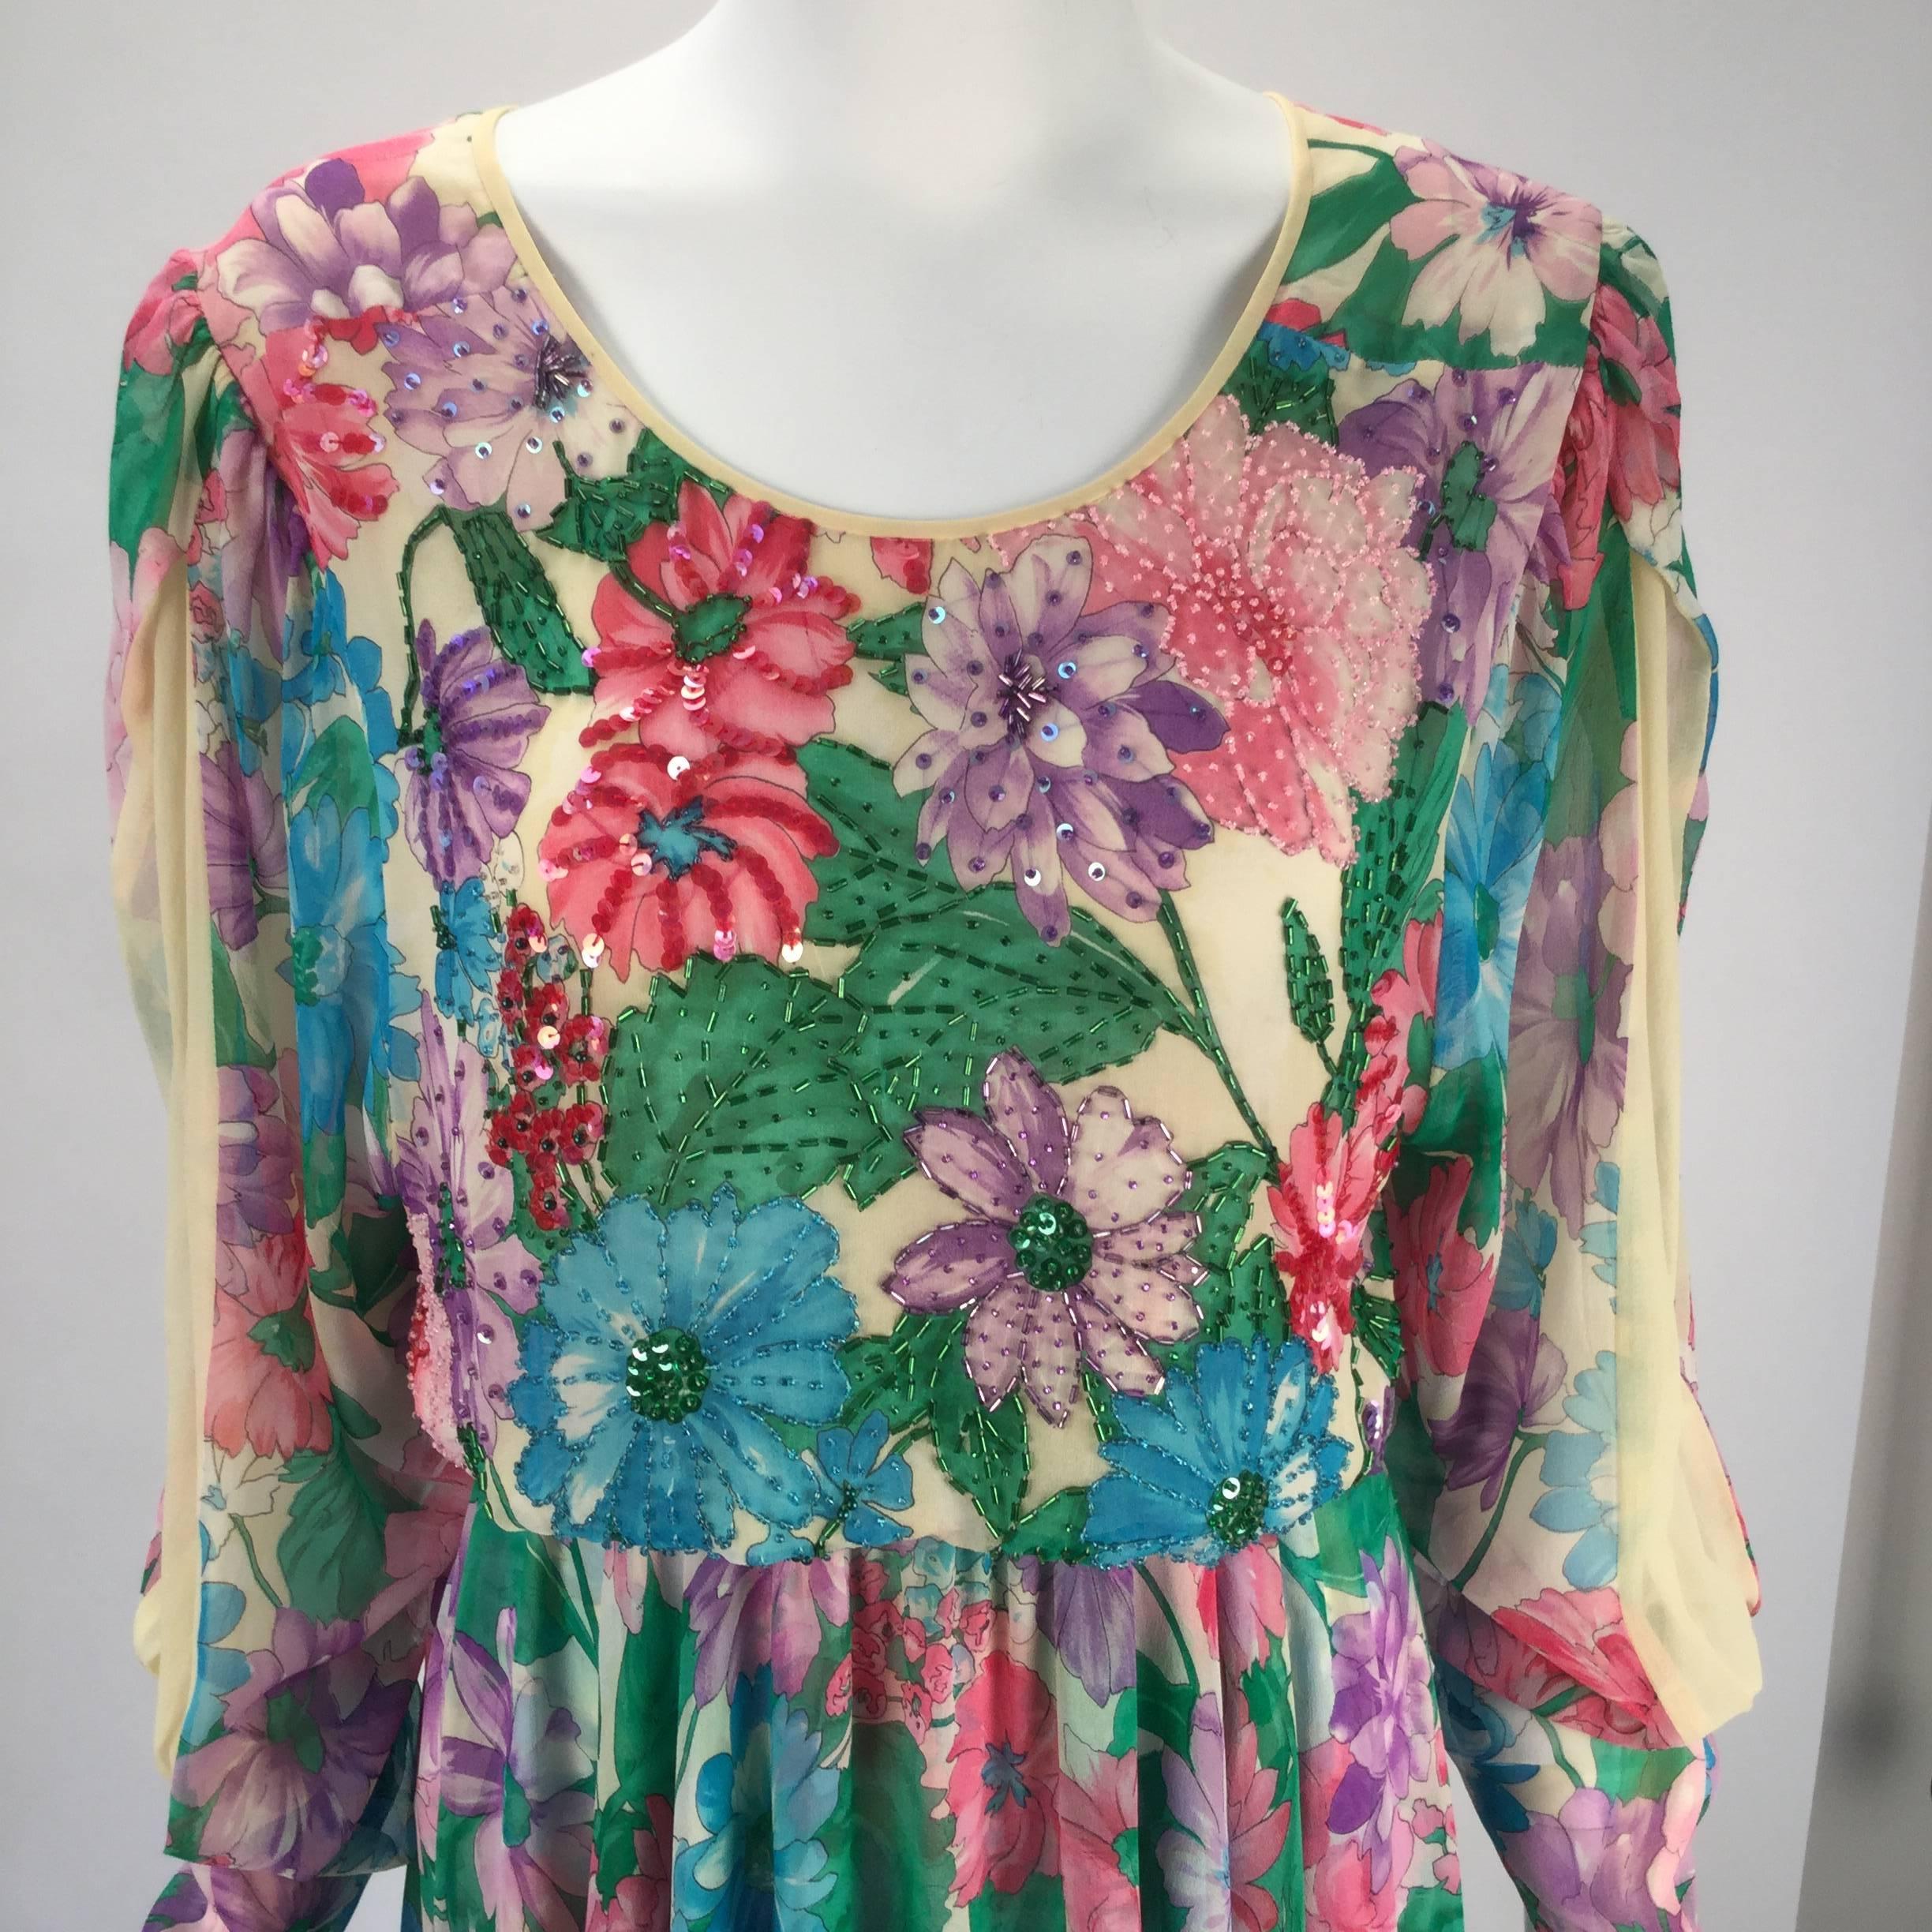 1980s Diane Freis silk long sleeve multicolor floral dress. The semi-sheer dress features a scoop neckline and a blouson silhouette from the bust to the waist. The waistband has elastic that has a ruching technique, which creates a gathering effect